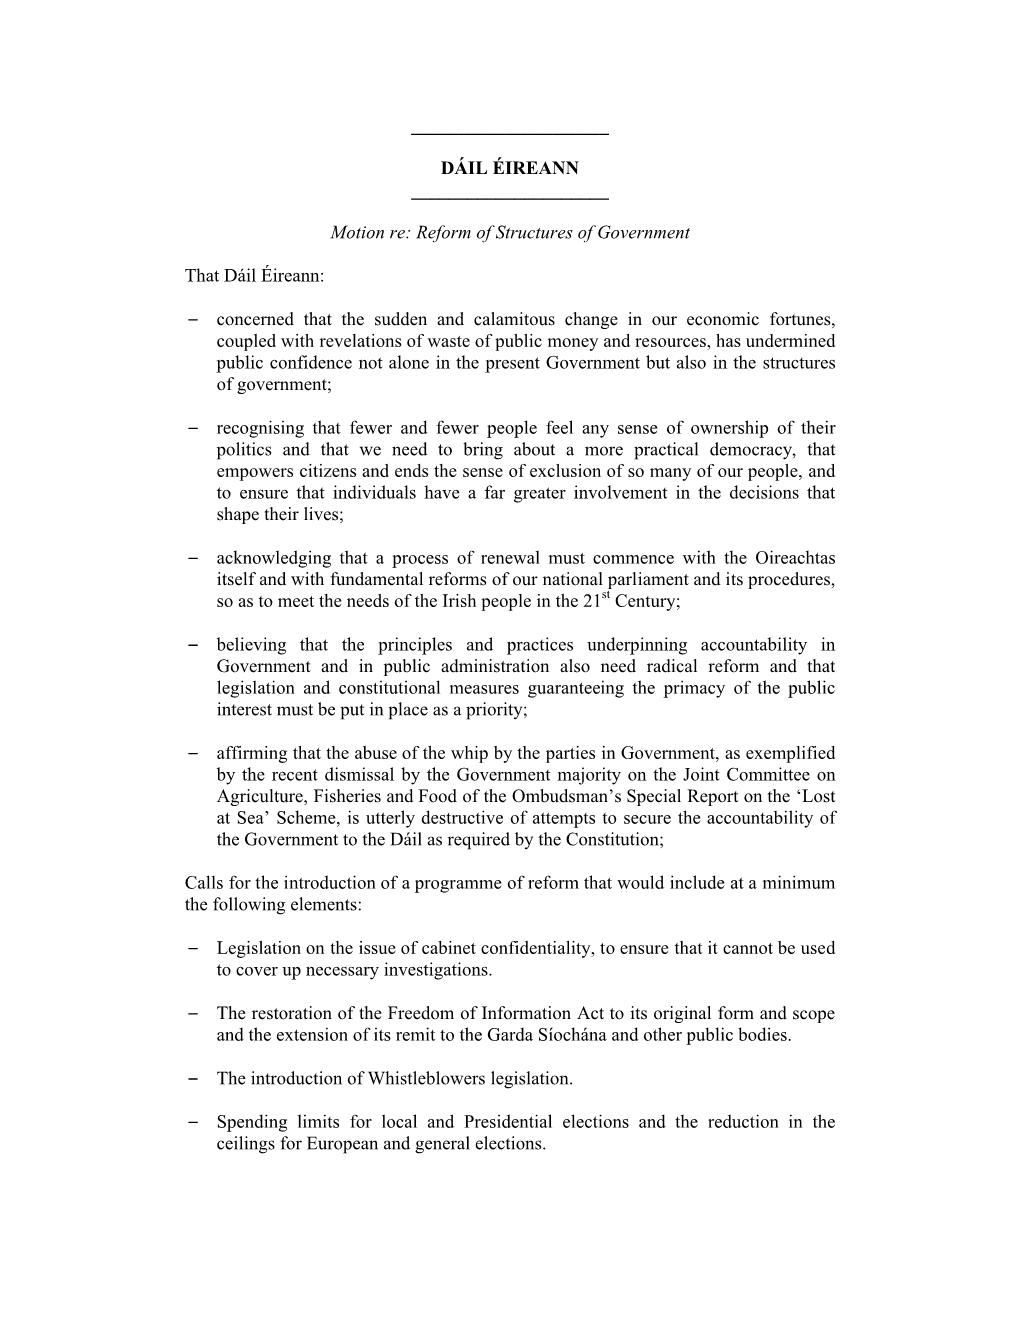 Reform of Structures of Government That Dáil Éireann